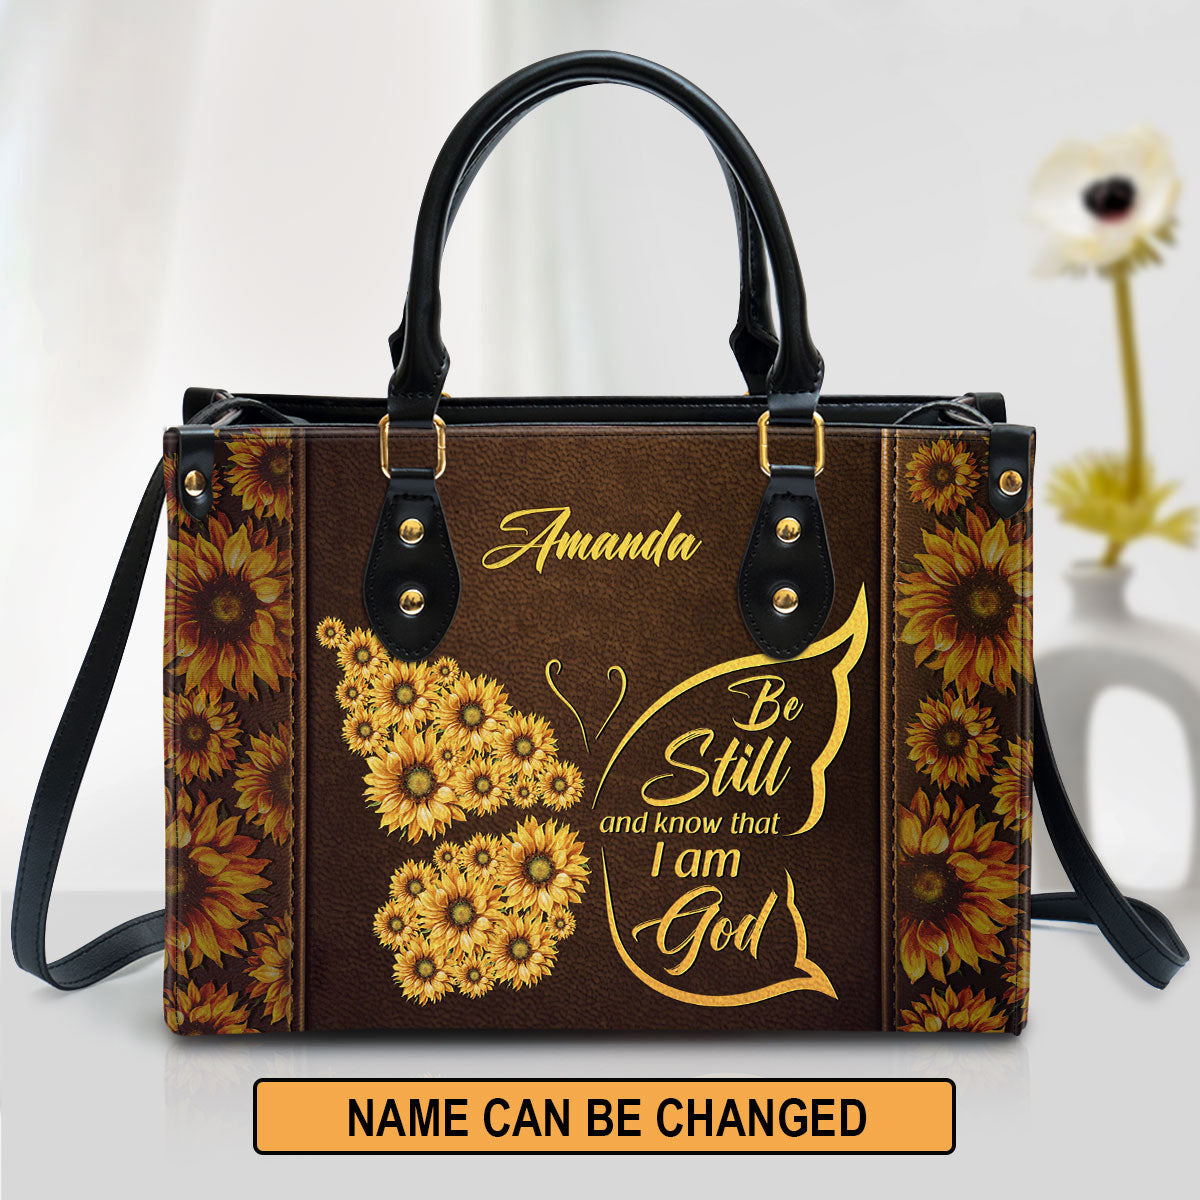 Be Still And Know That I Am God Psalm 4610 Personalized Leather Handbag With Handle Christ Gifts For Religious Women